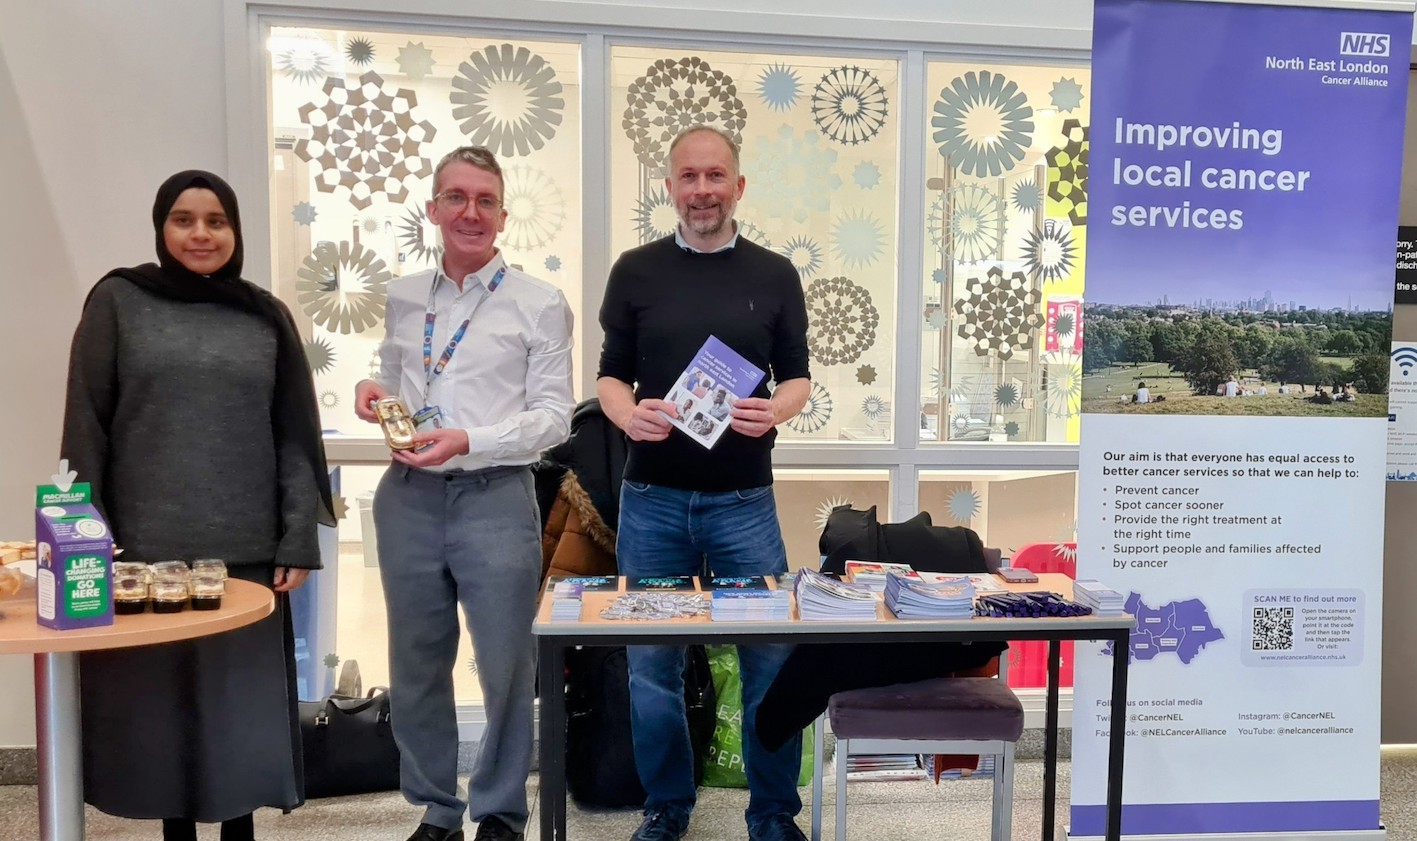 Two men and a lady are standing at cancer information stand which has cancer leaflets displayed on a table. A pop-up banner has the words 'Improving local cancer services' on it.